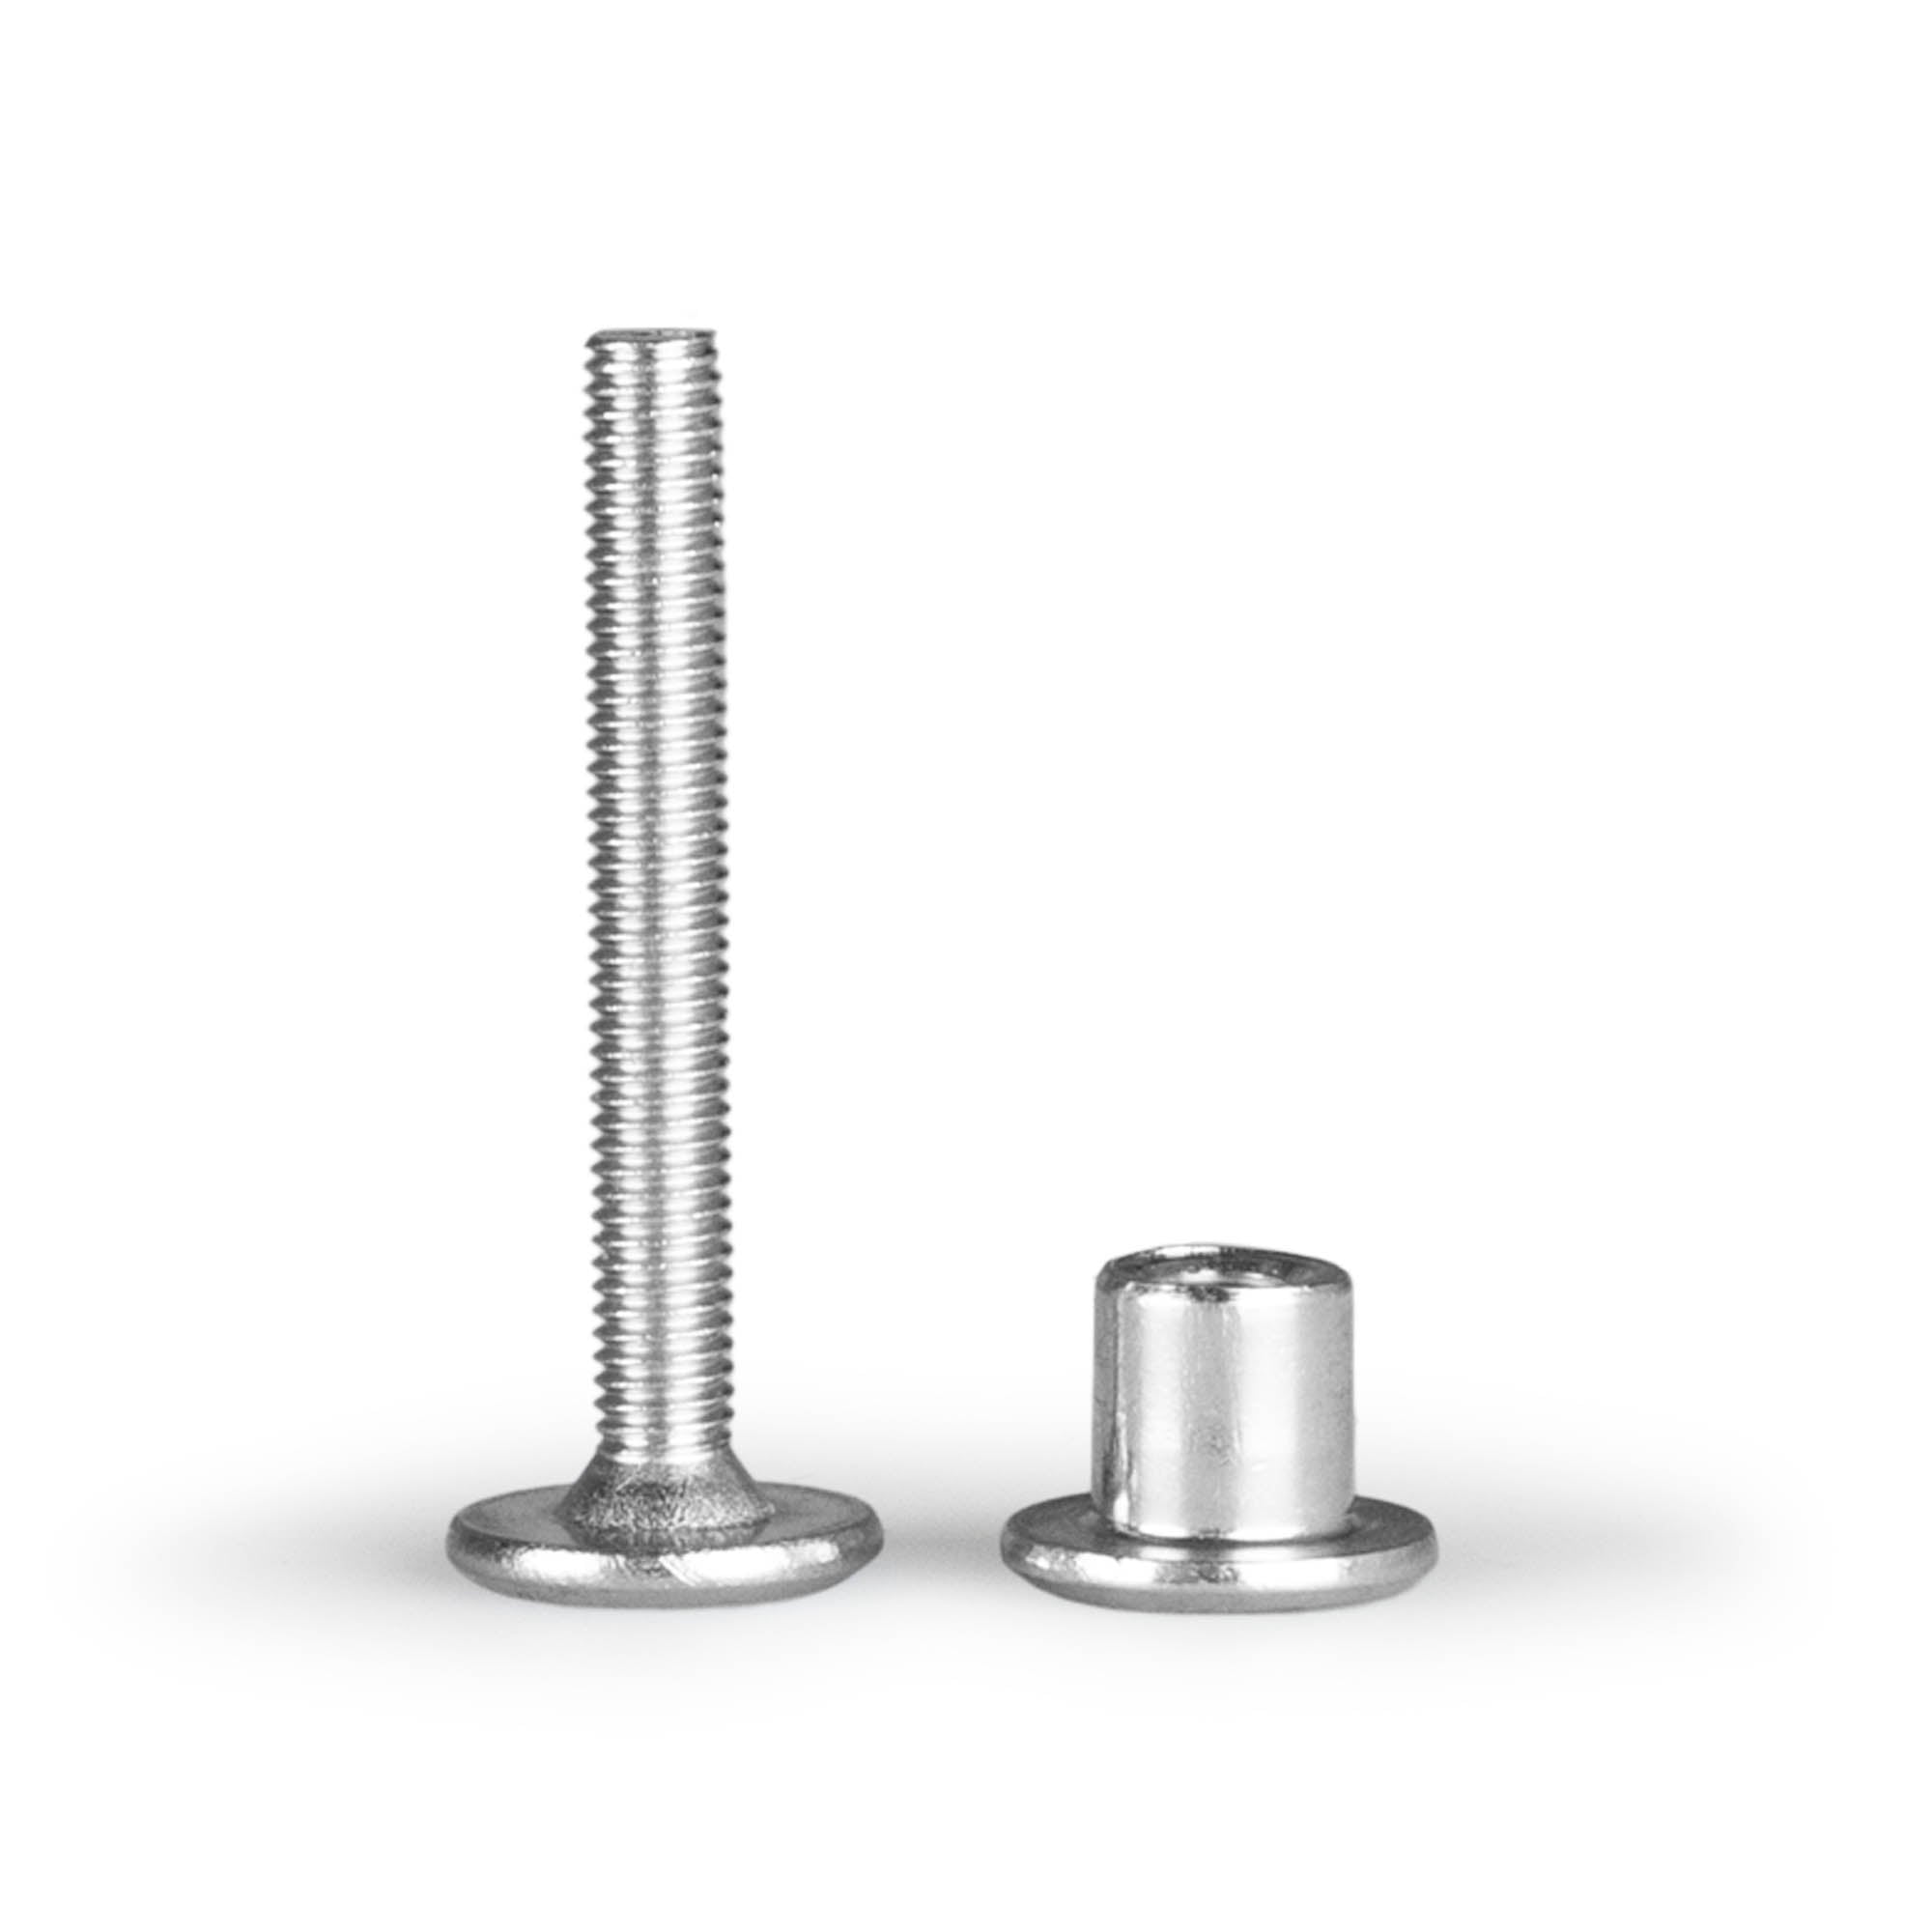 Large spare bolt and nut